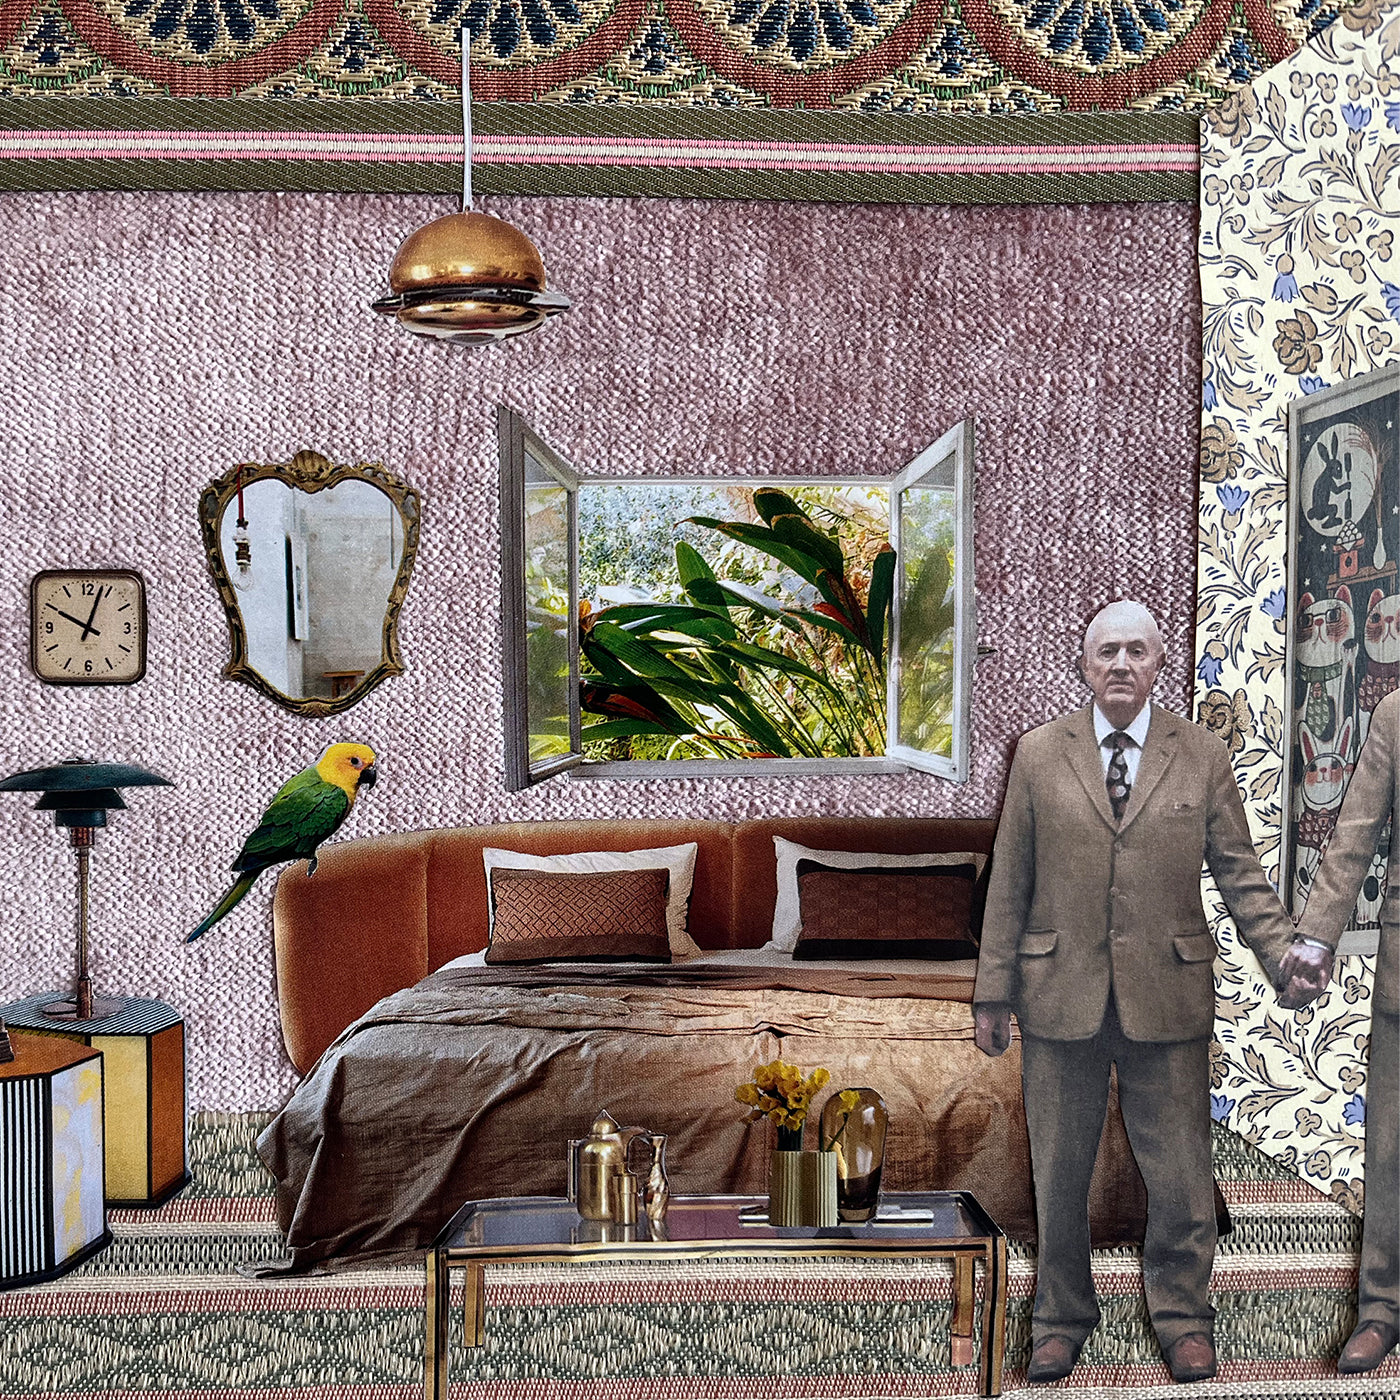 Gilbert & George Collage with Recycled Materials - Alternative view 2